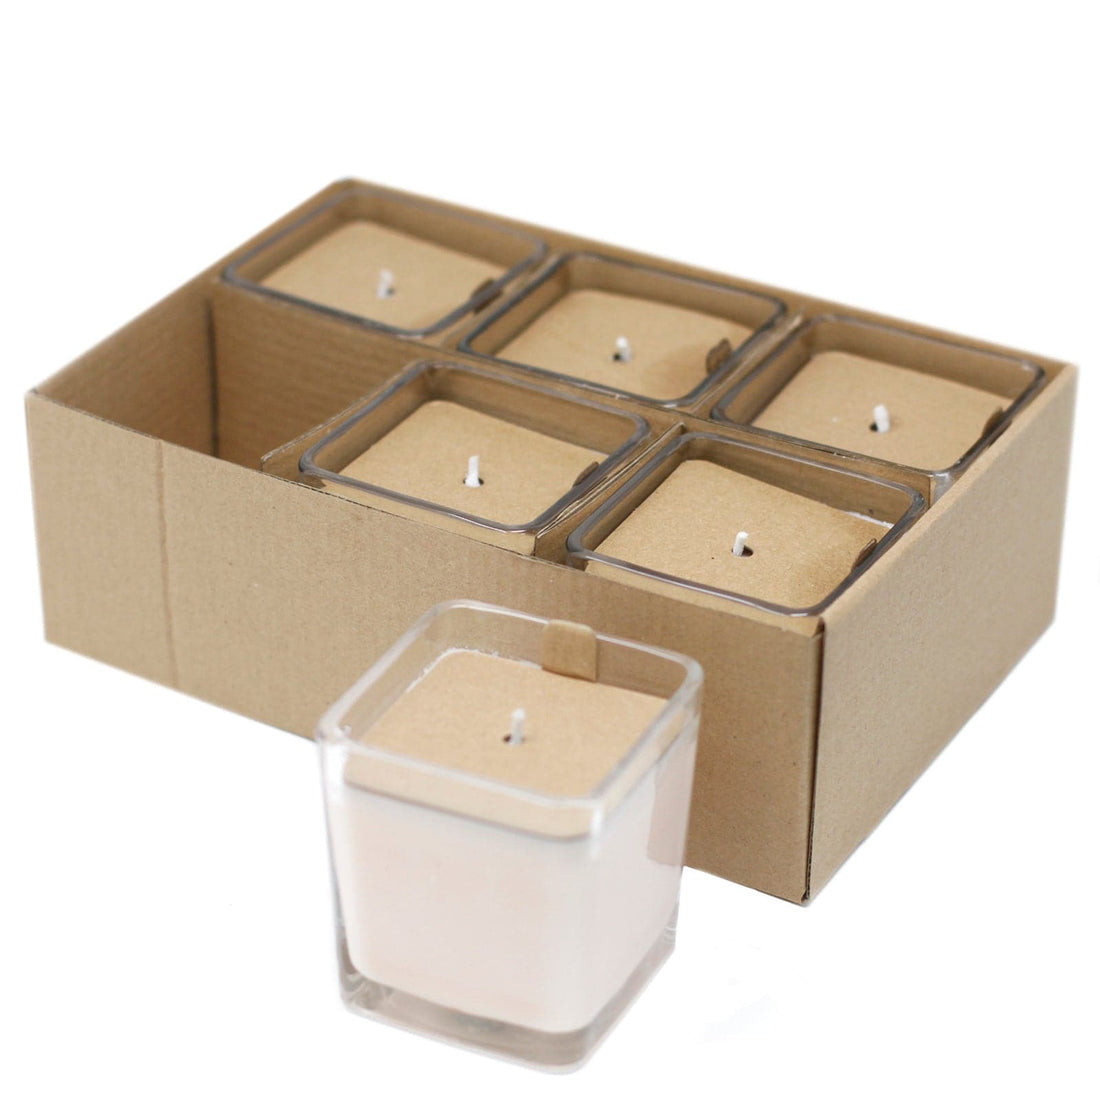 White Label Soy Wax Jar Candle - Baby Powder - best price from Maltashopper.com WLSOYC-09